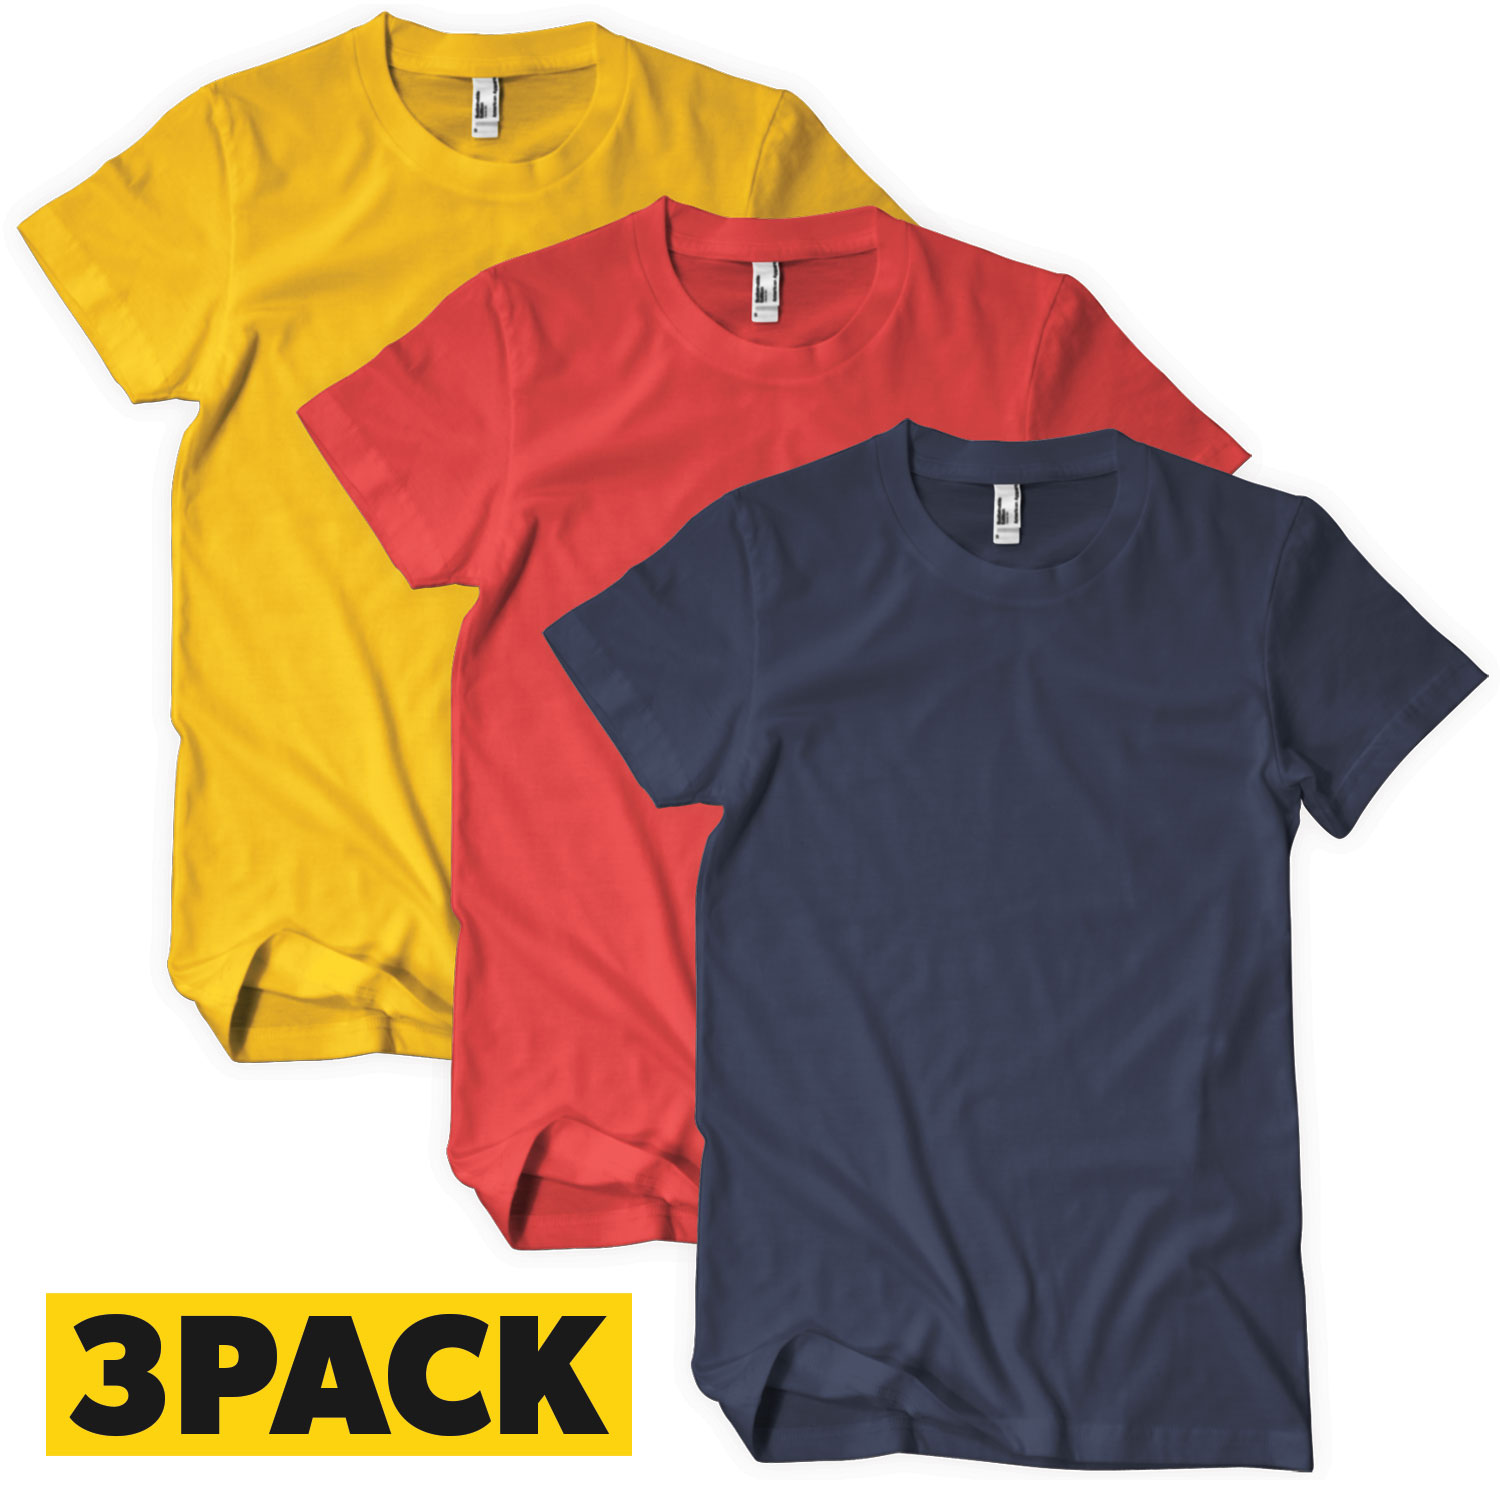 T-Shirts Big Pack Colored - 3 pack